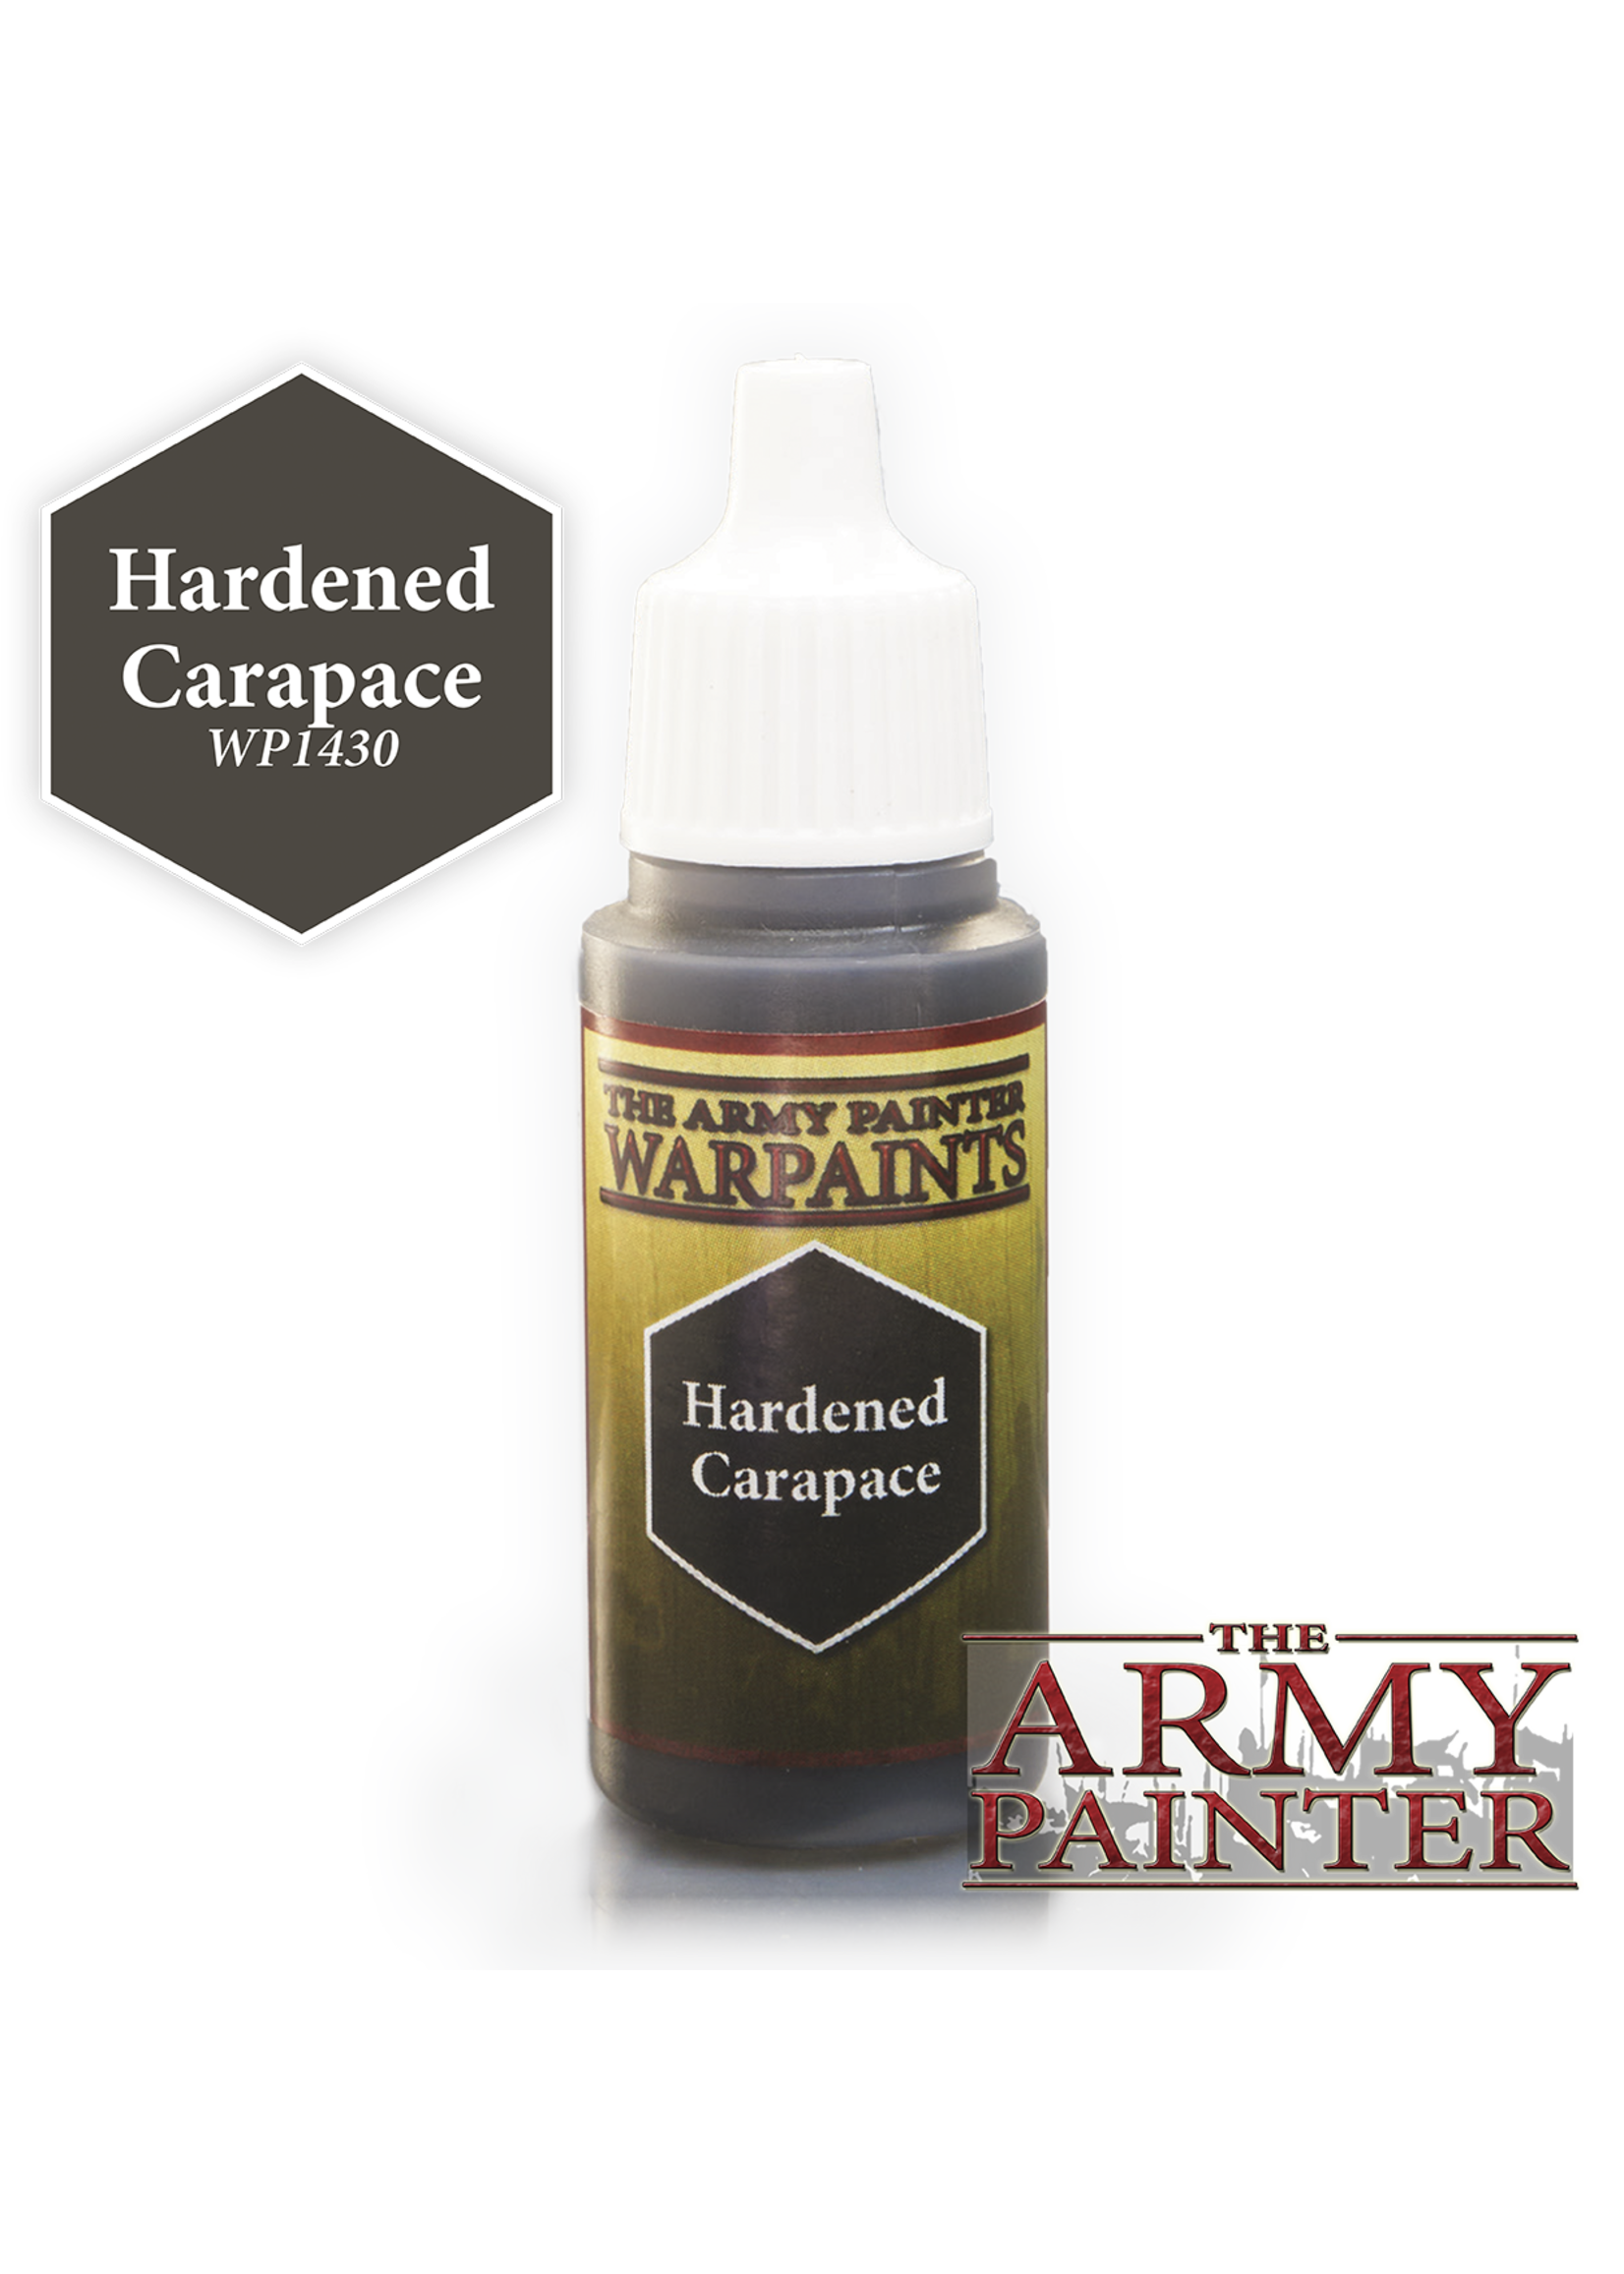 The Army Painter Acrylics Warpaints Hardened Carapace